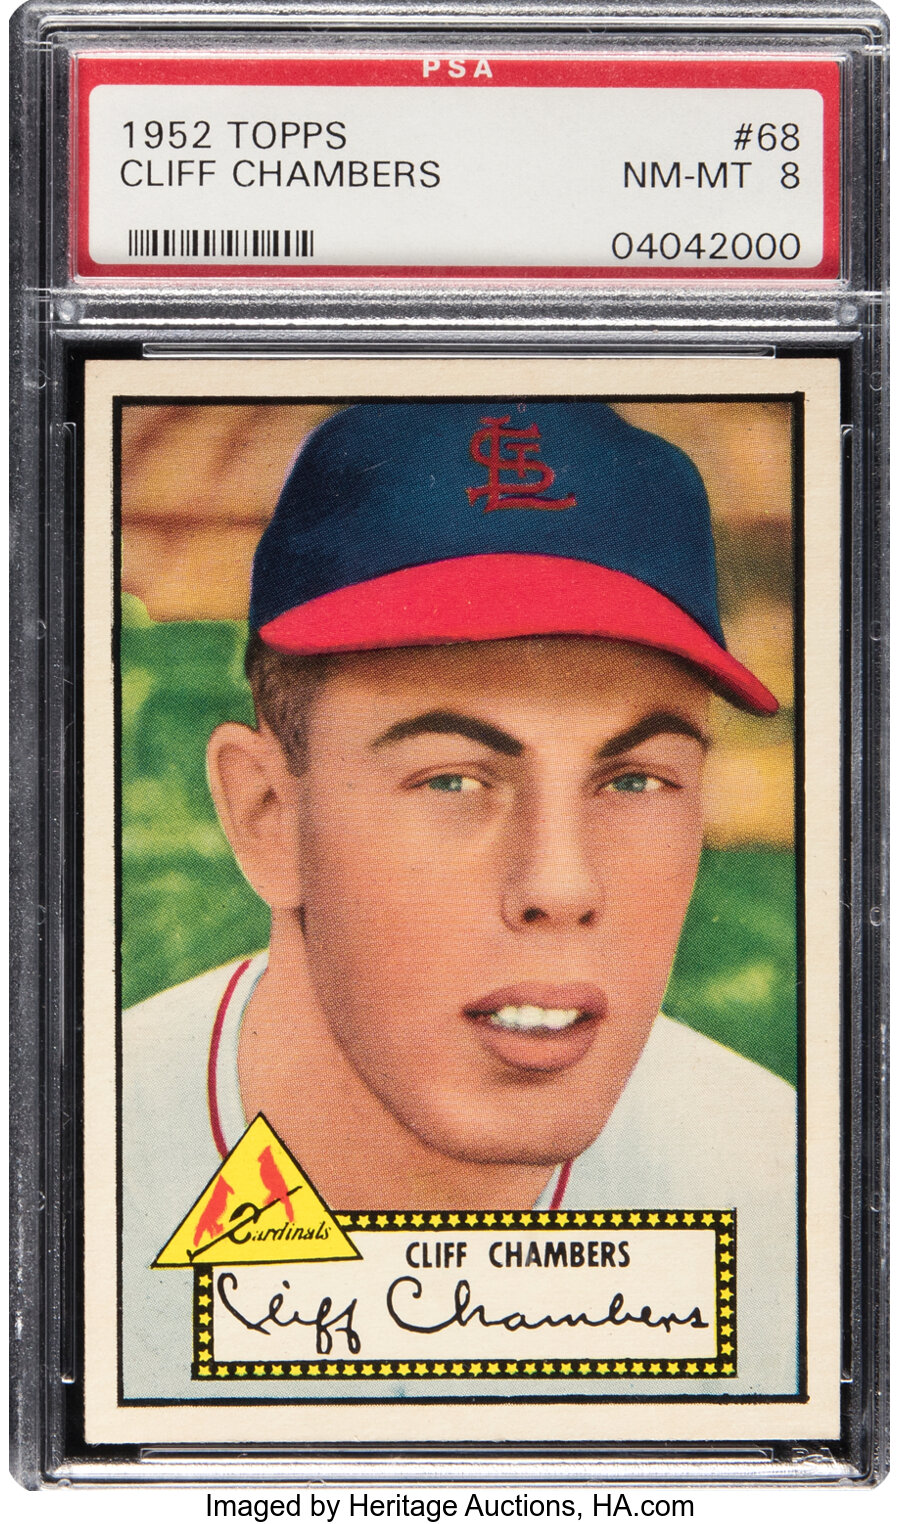 1952 Topps Cliff Chambers #68 PSA NM-MT 8 - None Higher!